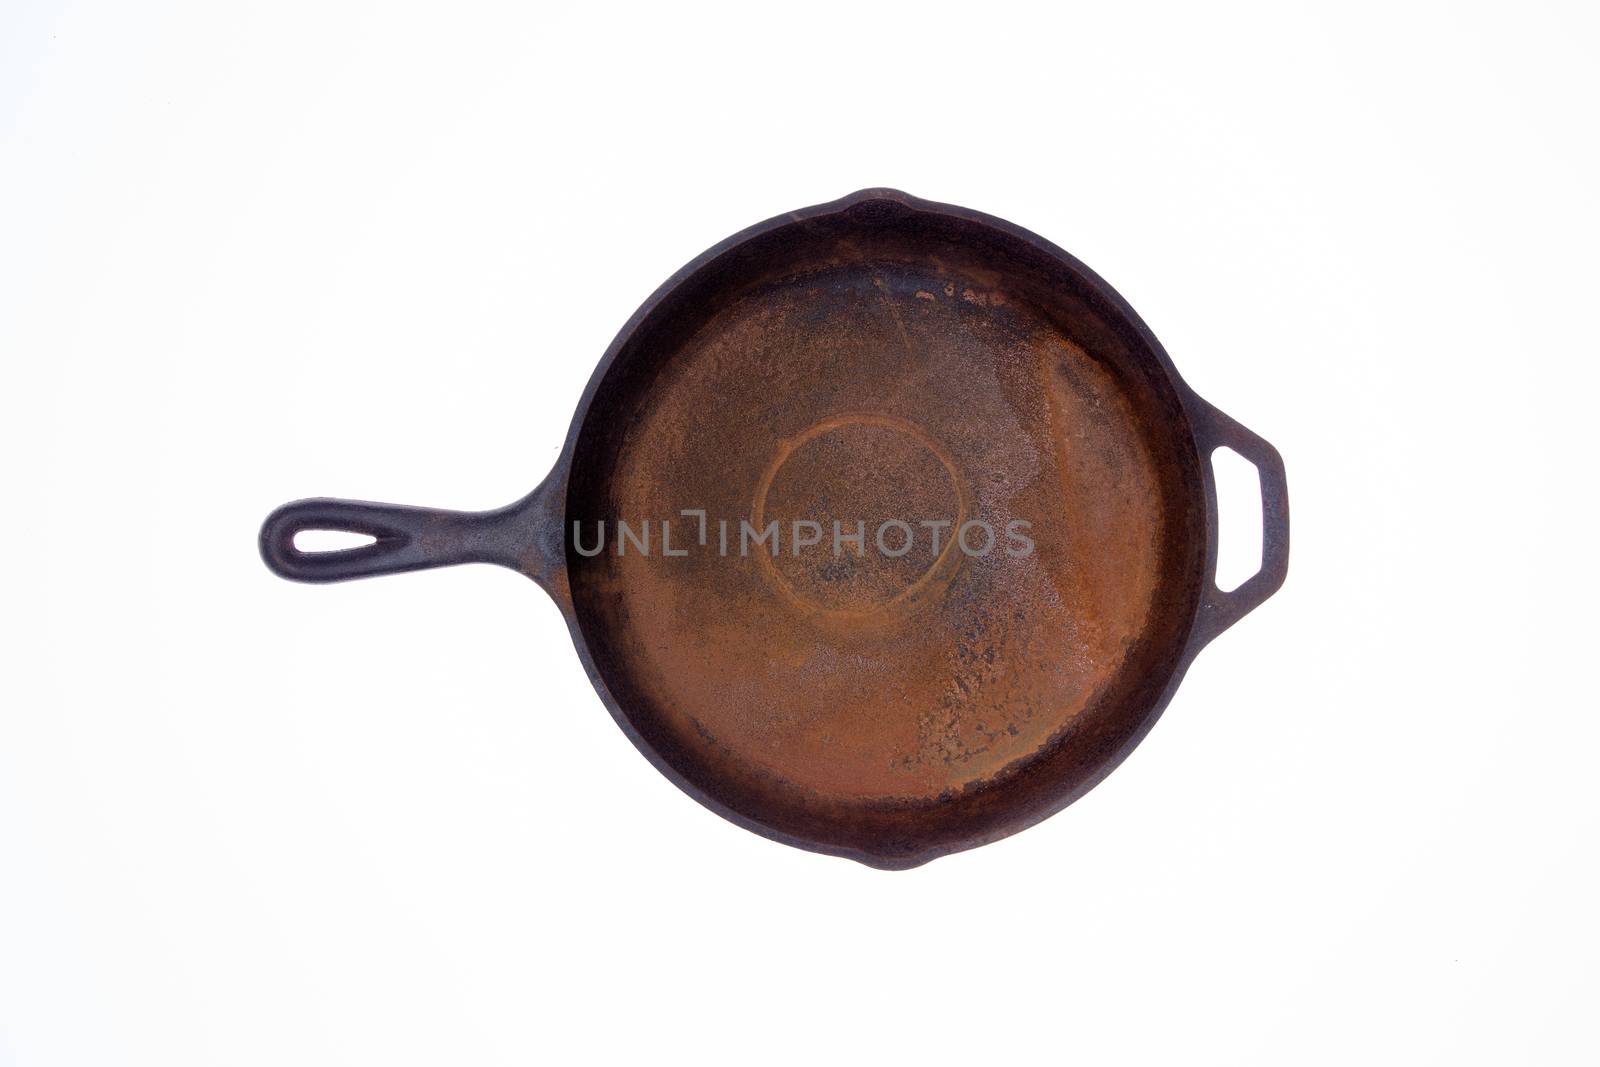 Old rusty round cast iron frying pan by coskun